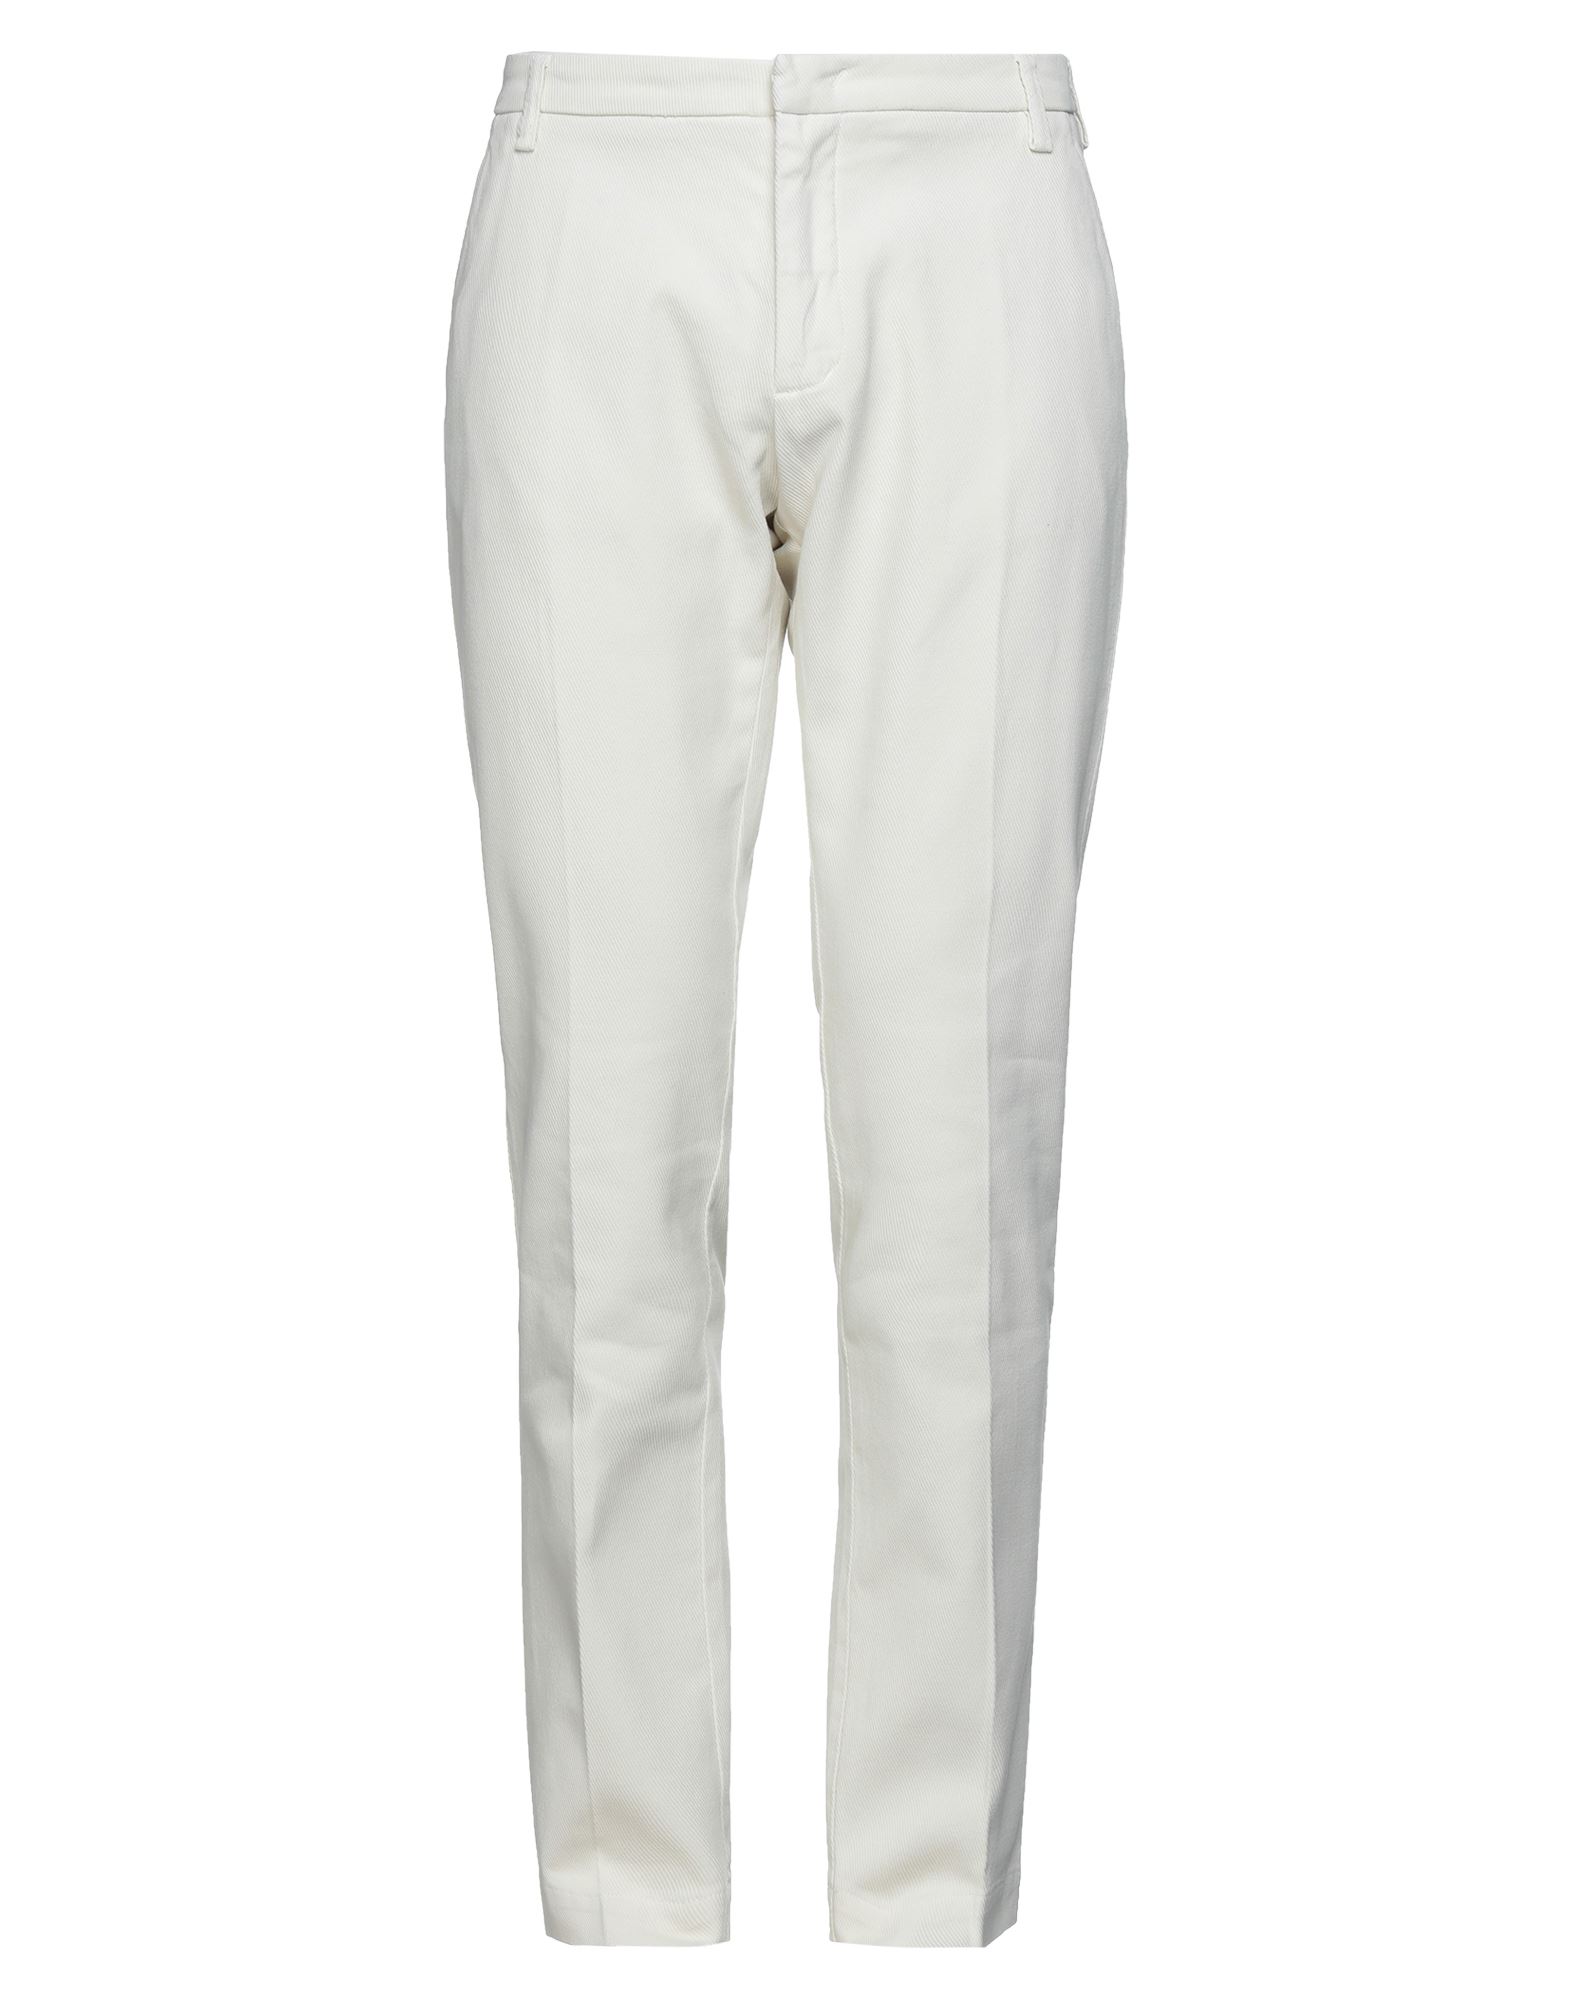 Entre Amis Pants In Ivory